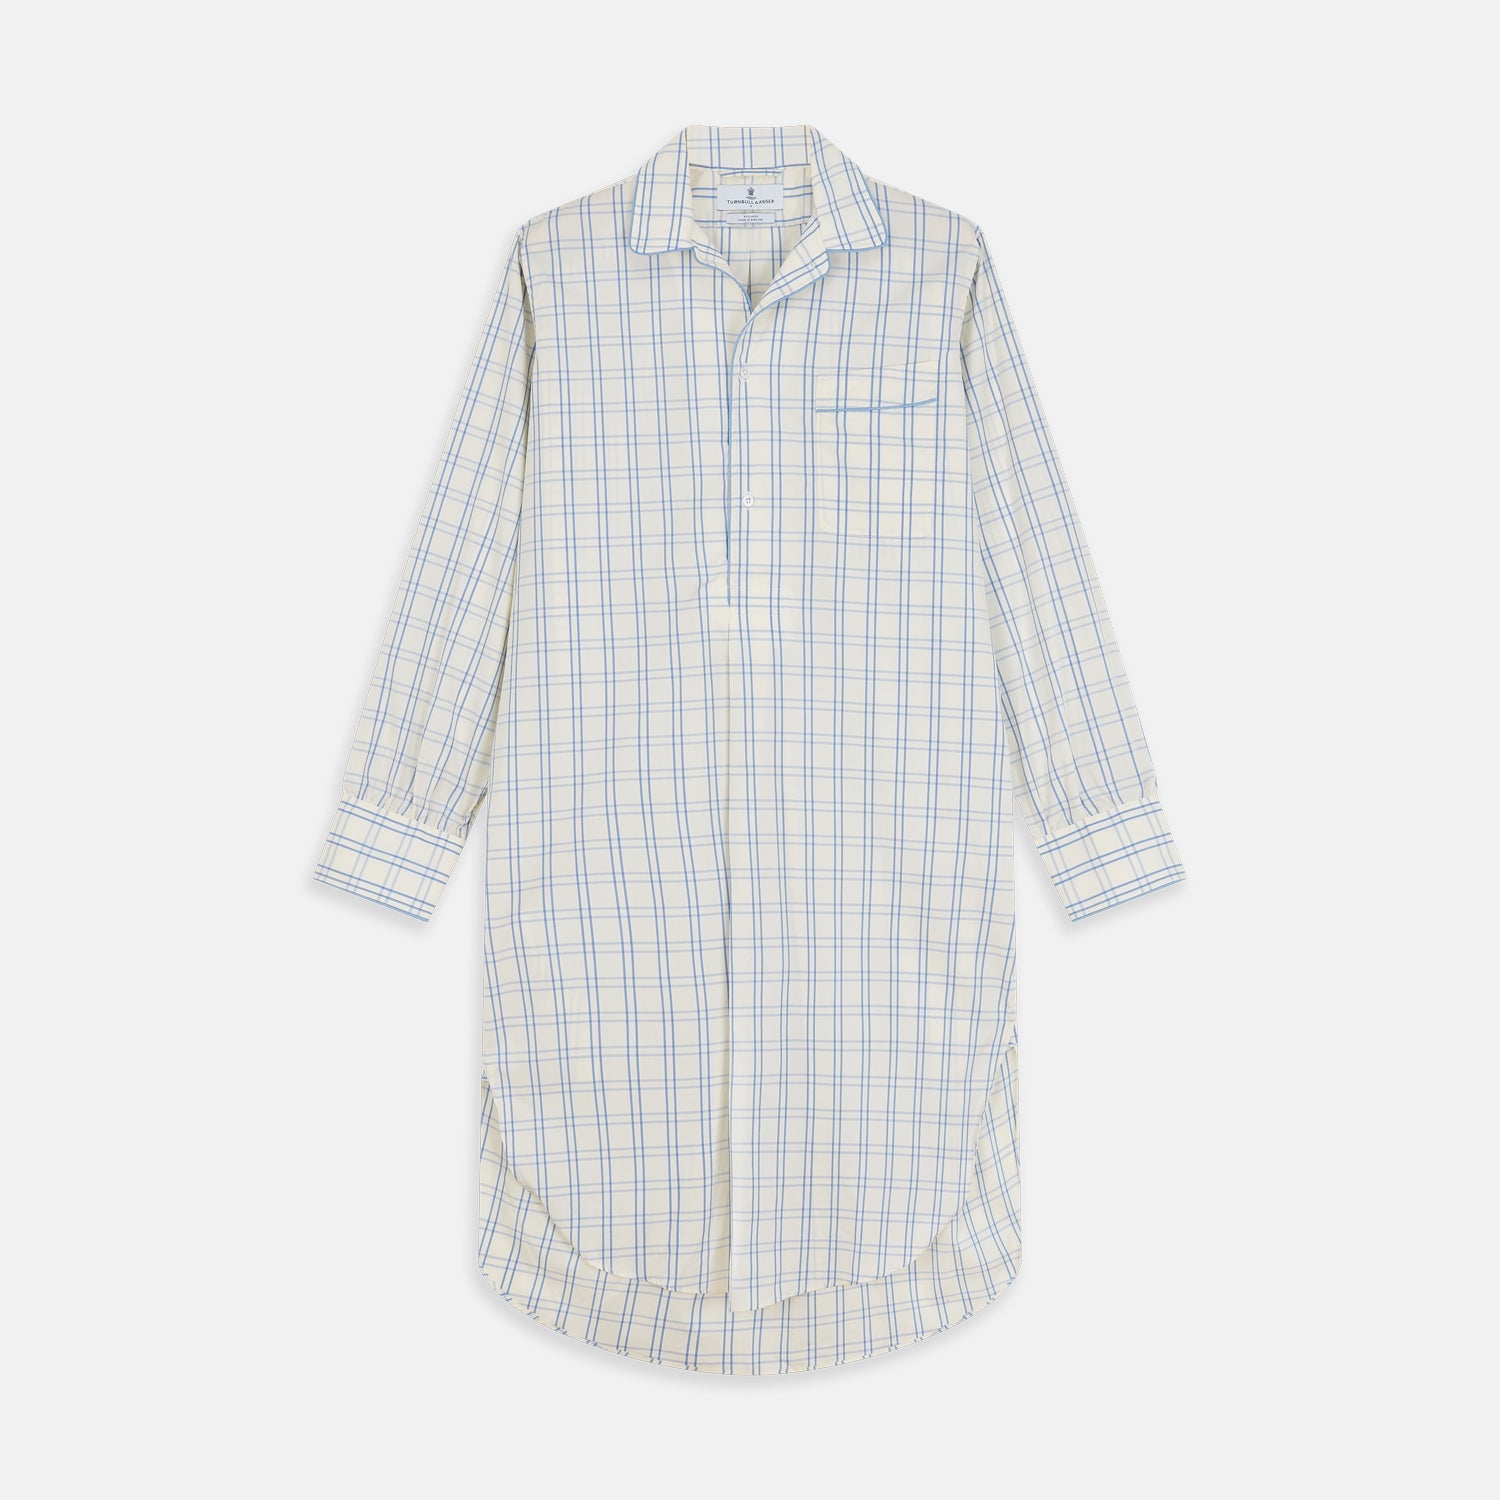 The History of the Nightshirt – Turnbull & Asser